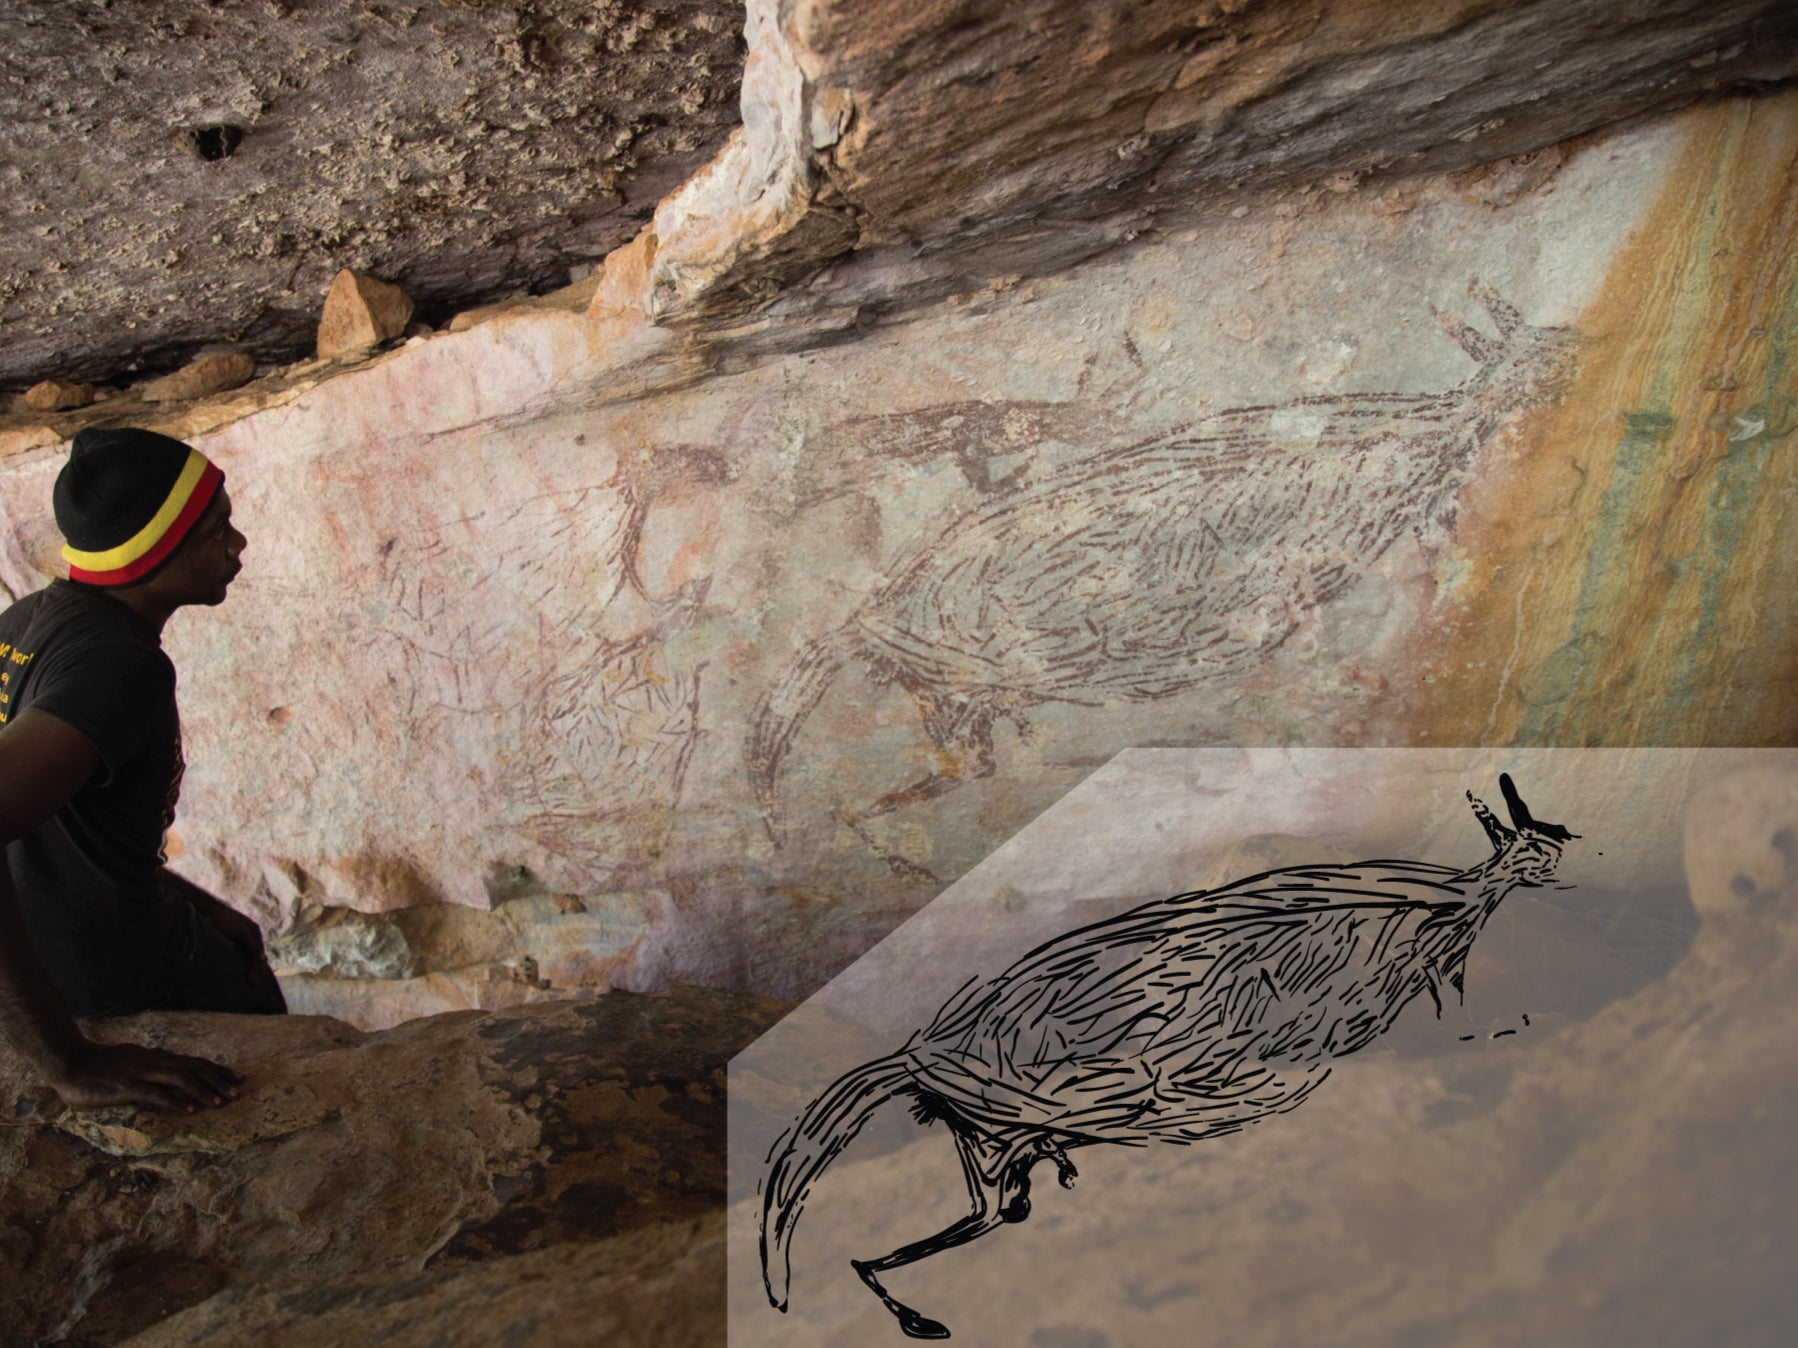 Traditional owner Ian Waina inspecting the Naturalistic painting. The inset is an illustration of the painting